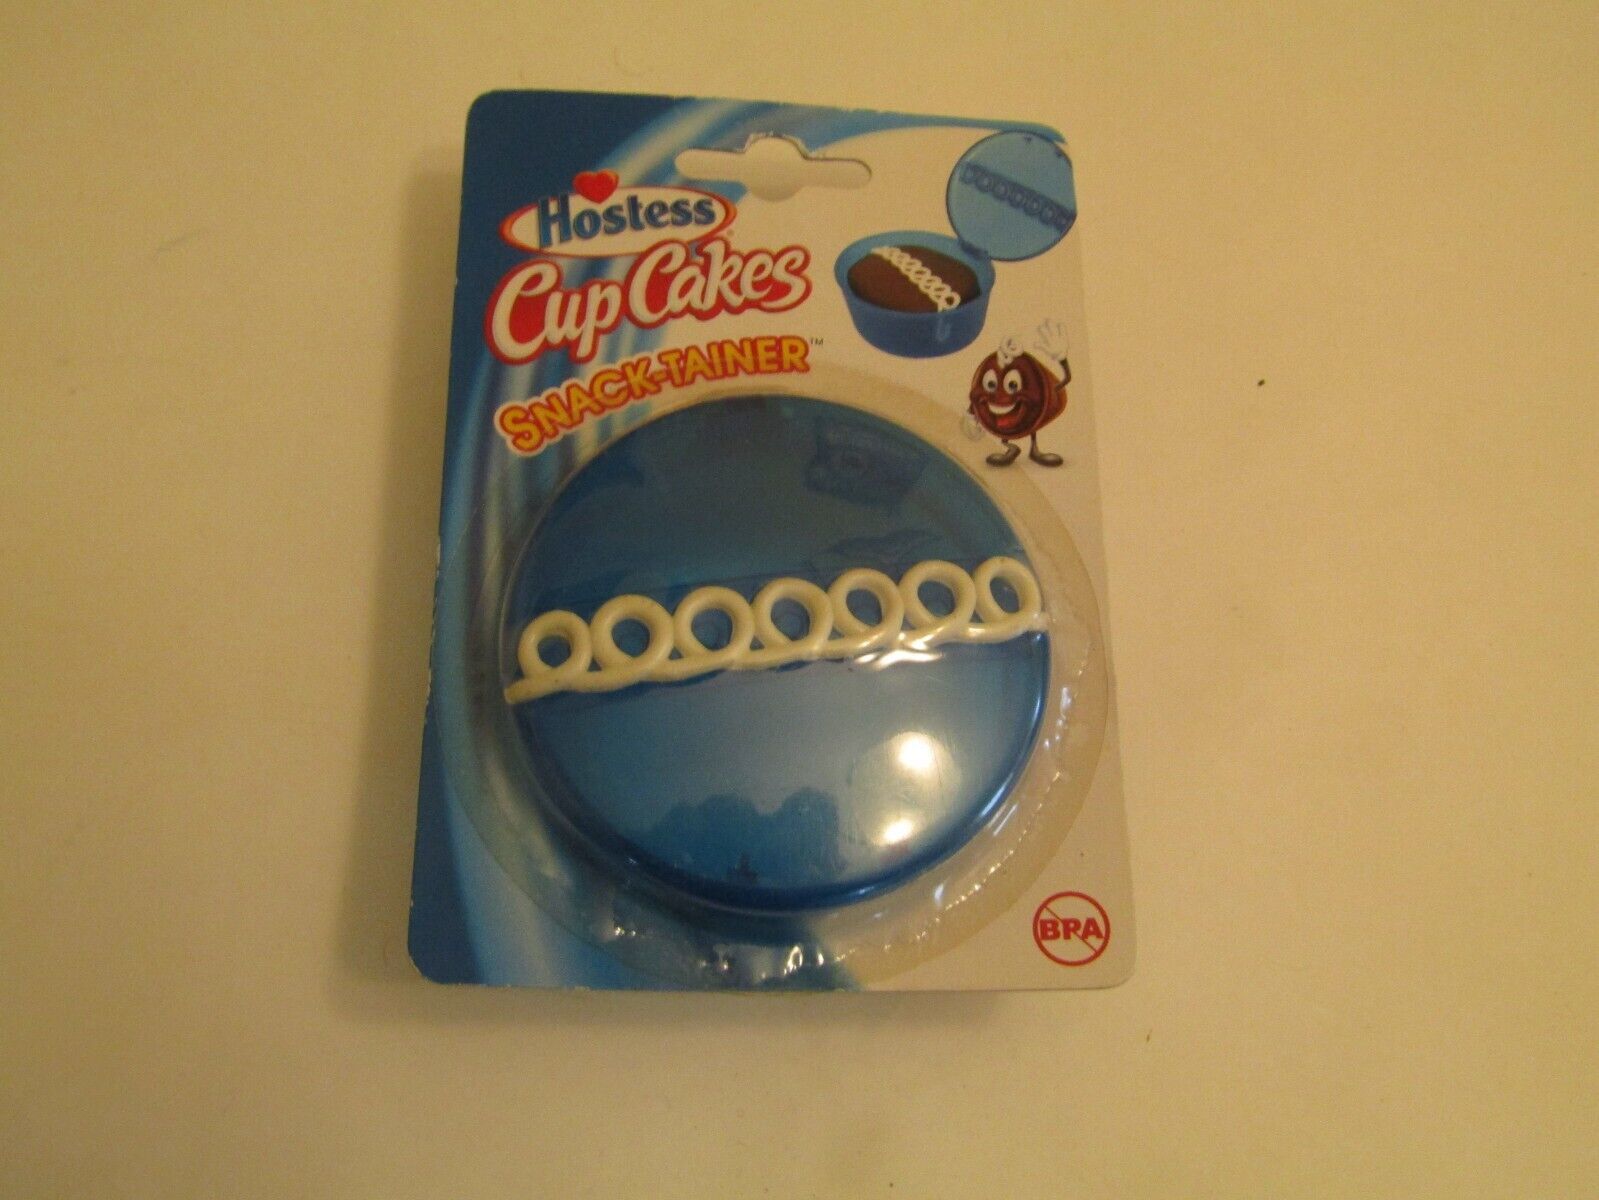 Primary image for Hostess CupCakes Snack-Tainer Container (Blue)